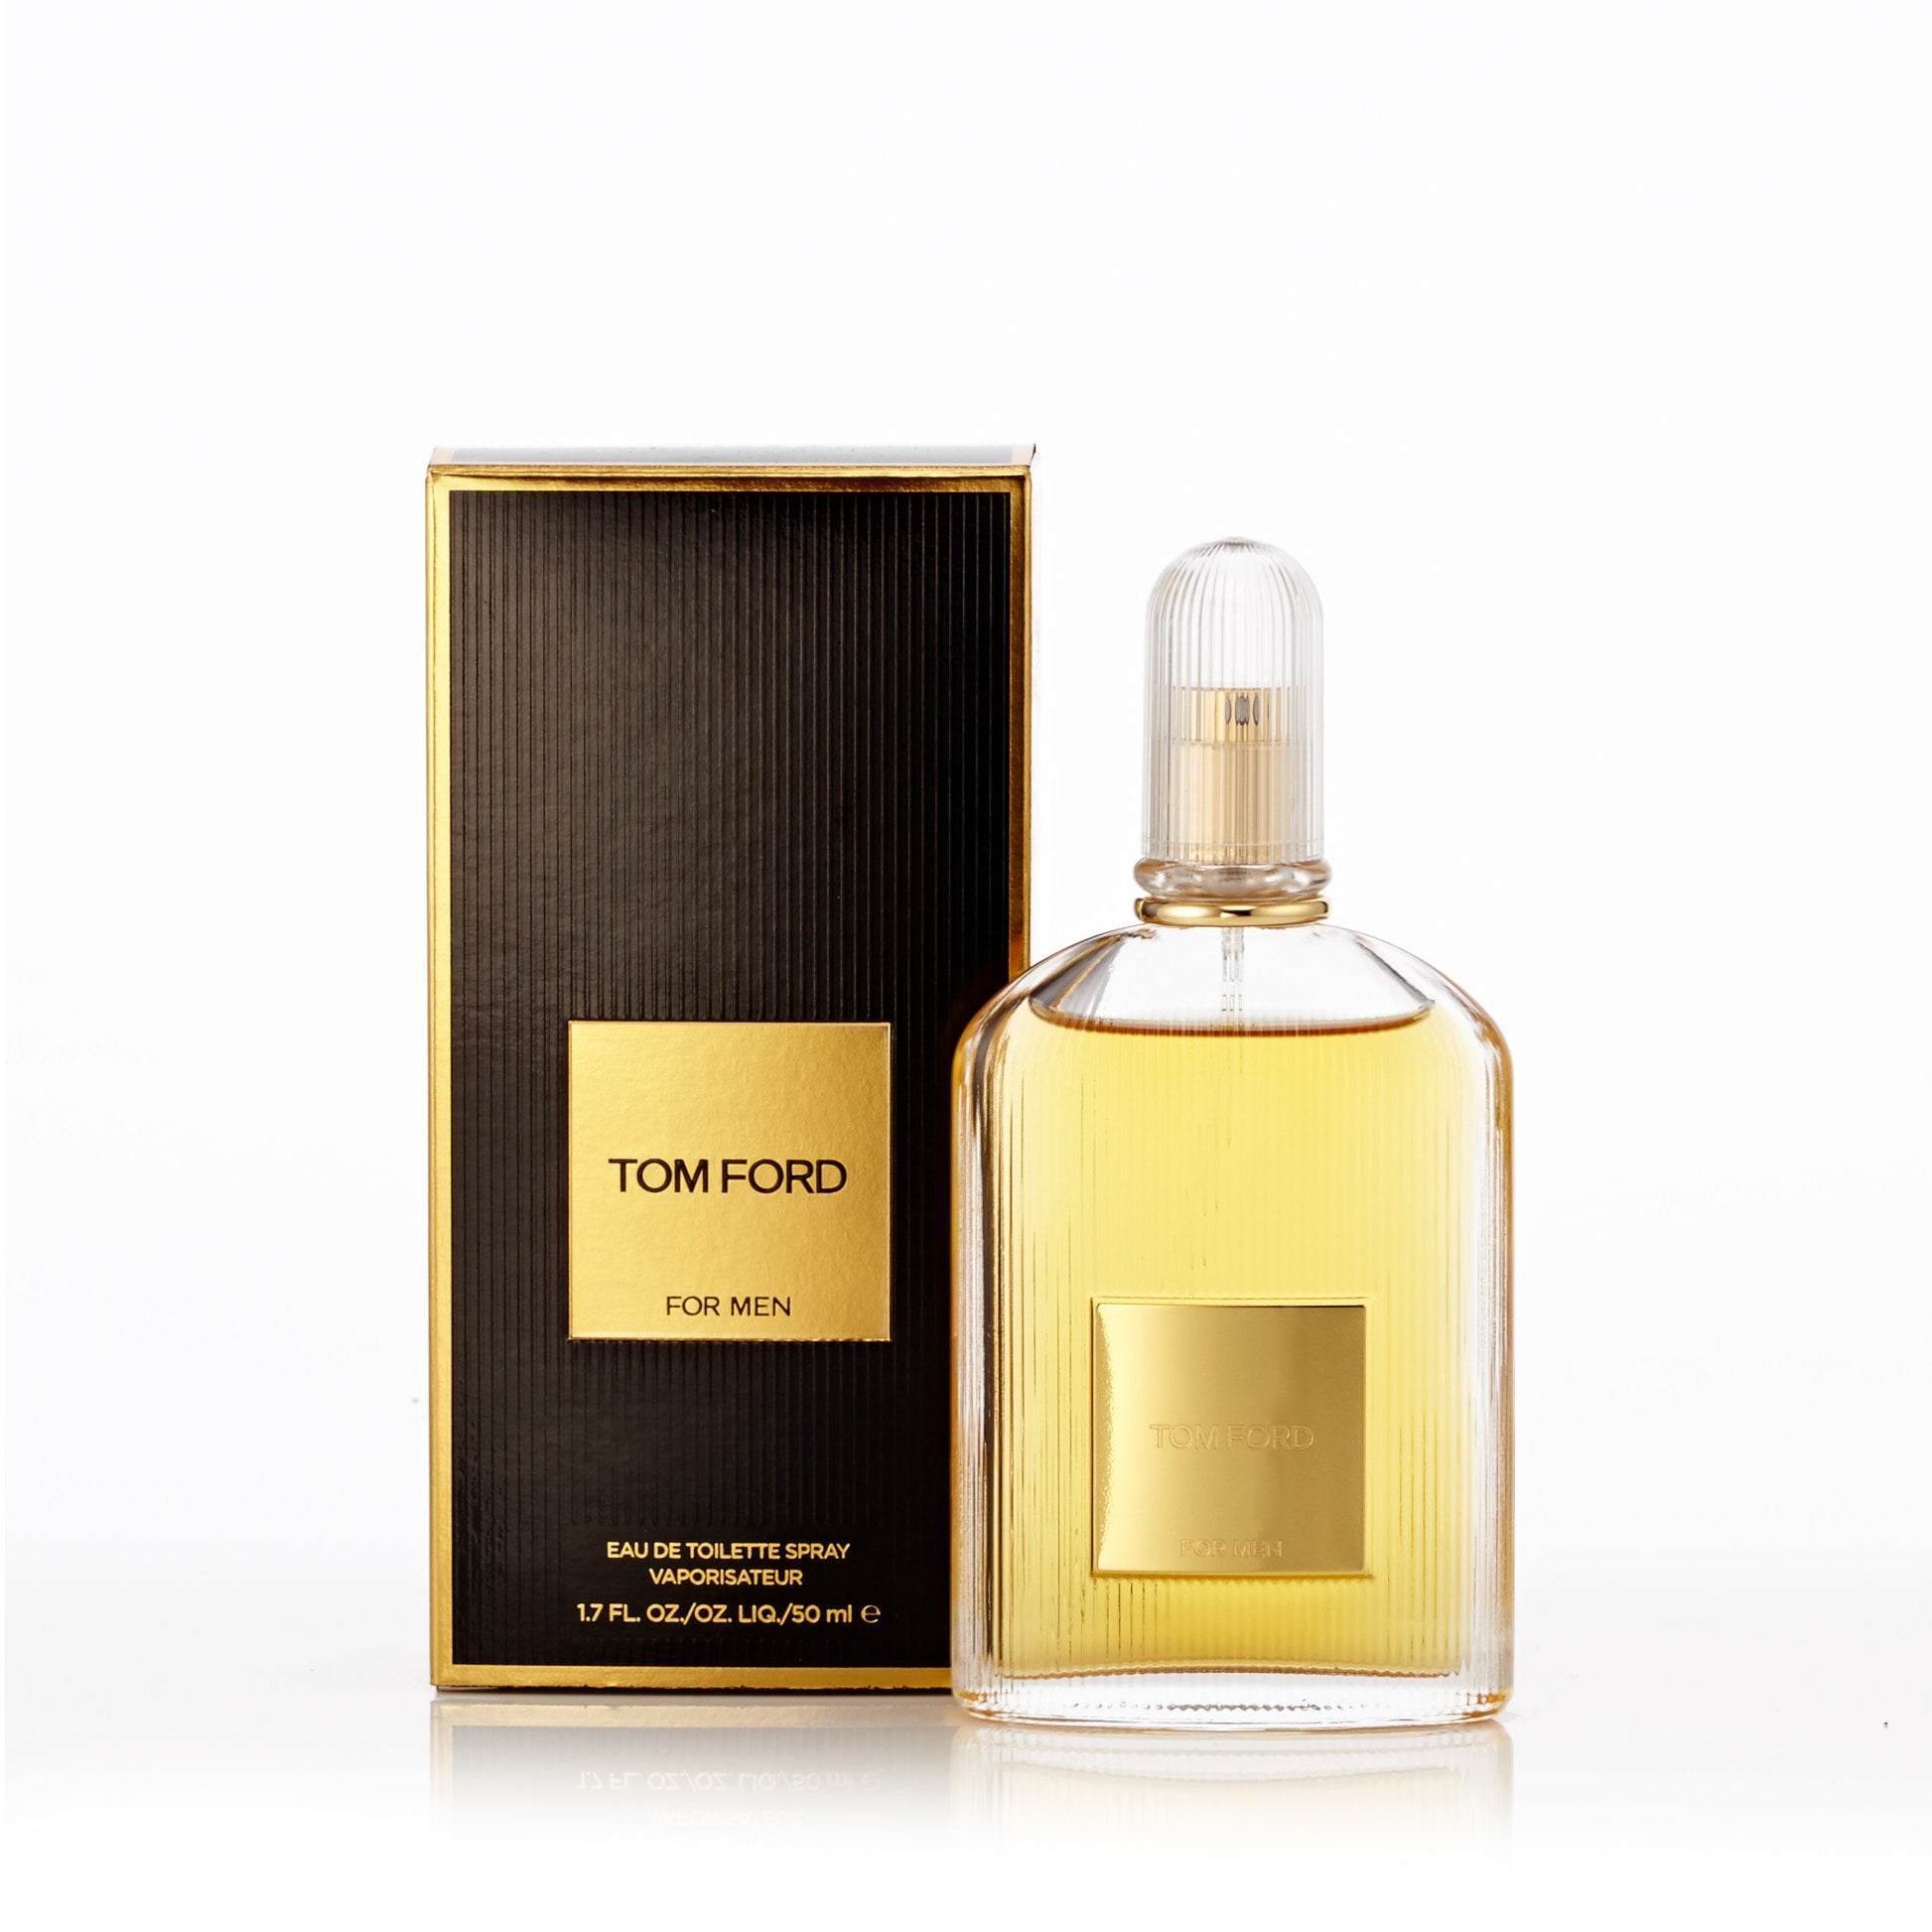 Tom Ford Eau de Toilette Spray for Men by Tom Ford, Product image 4